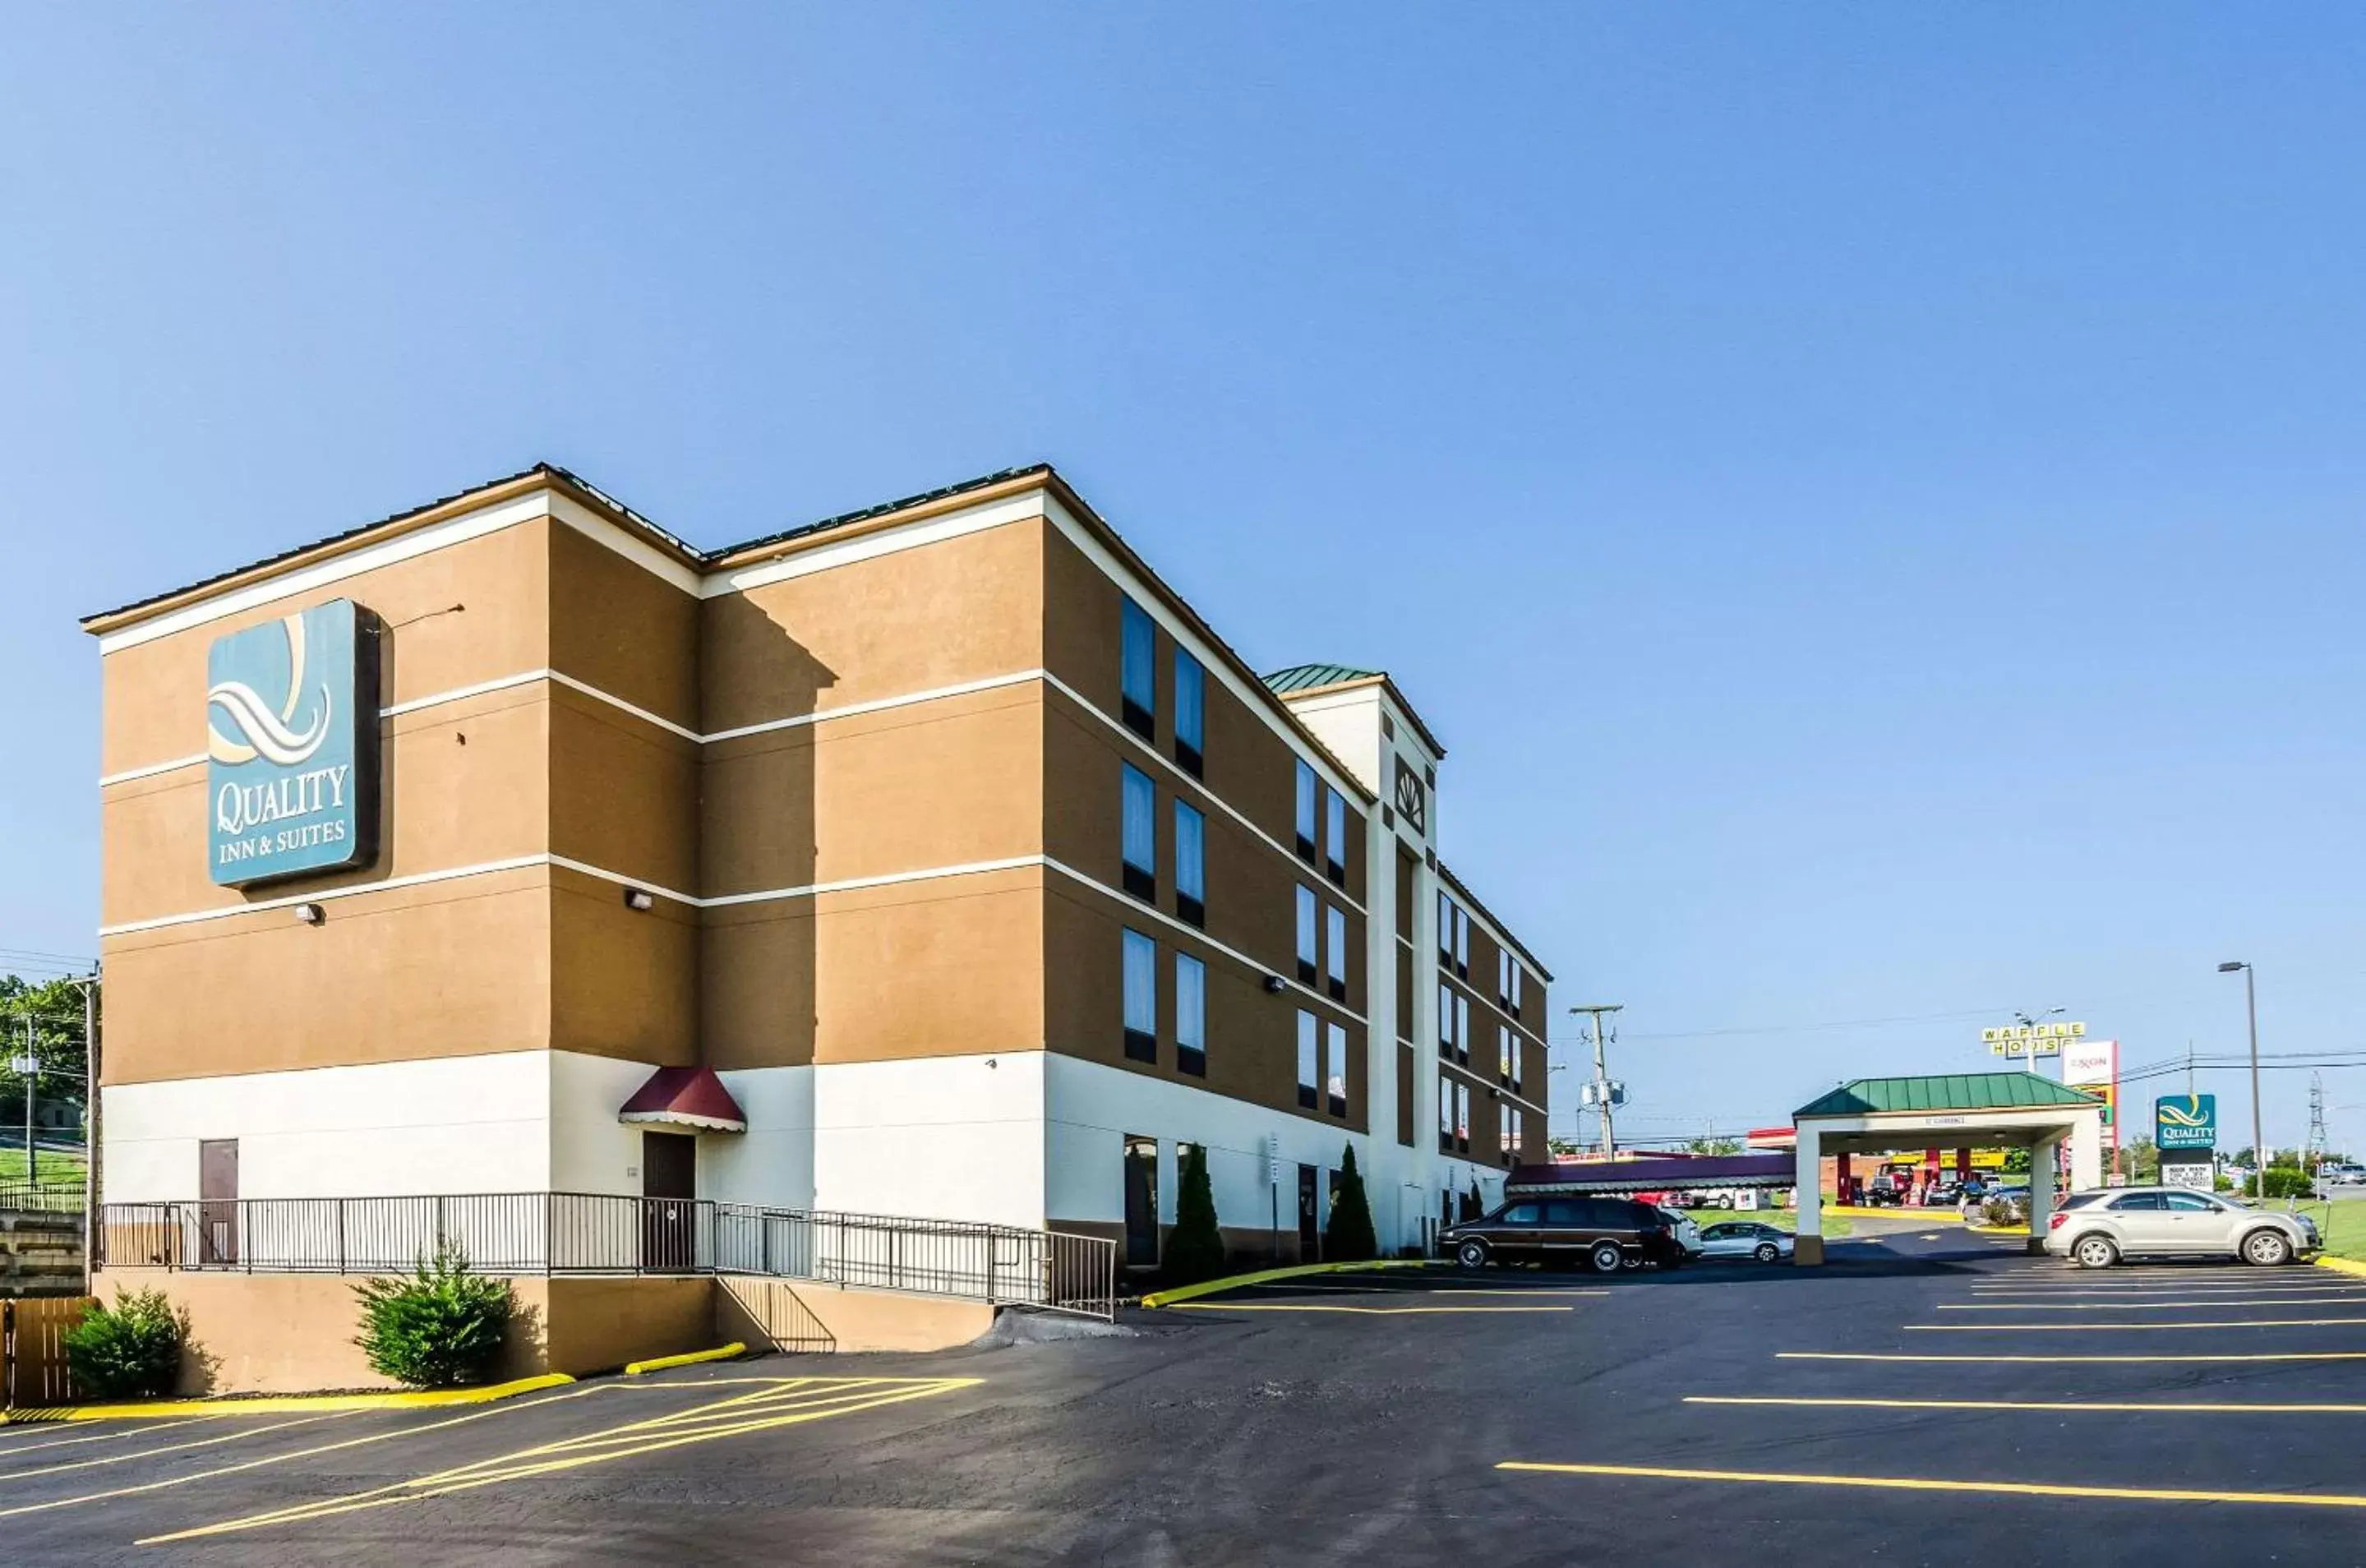 Property Building in Quality Inn & Suites Wytheville